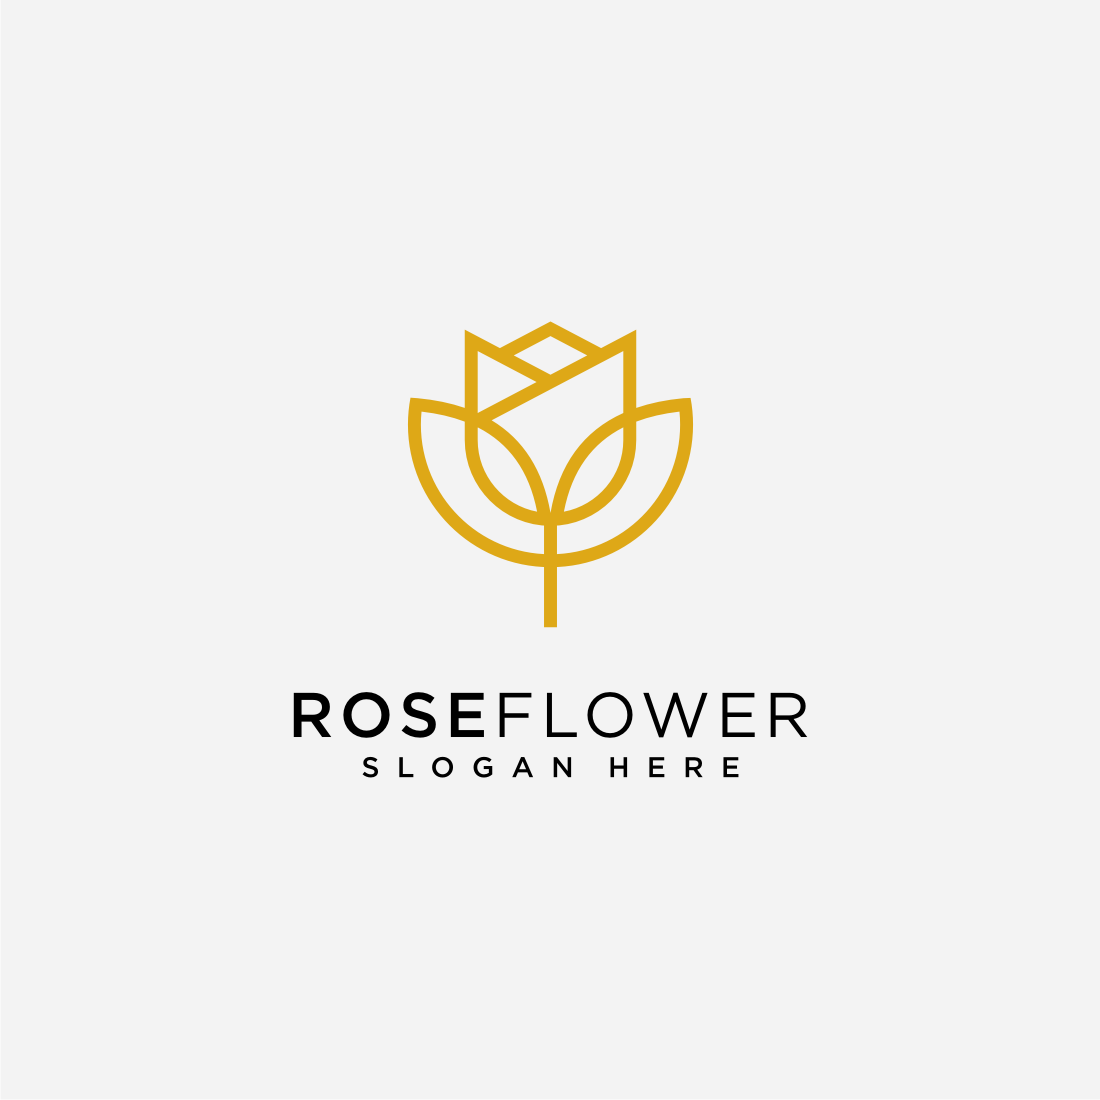 Rose Logo Template | PosterMyWall